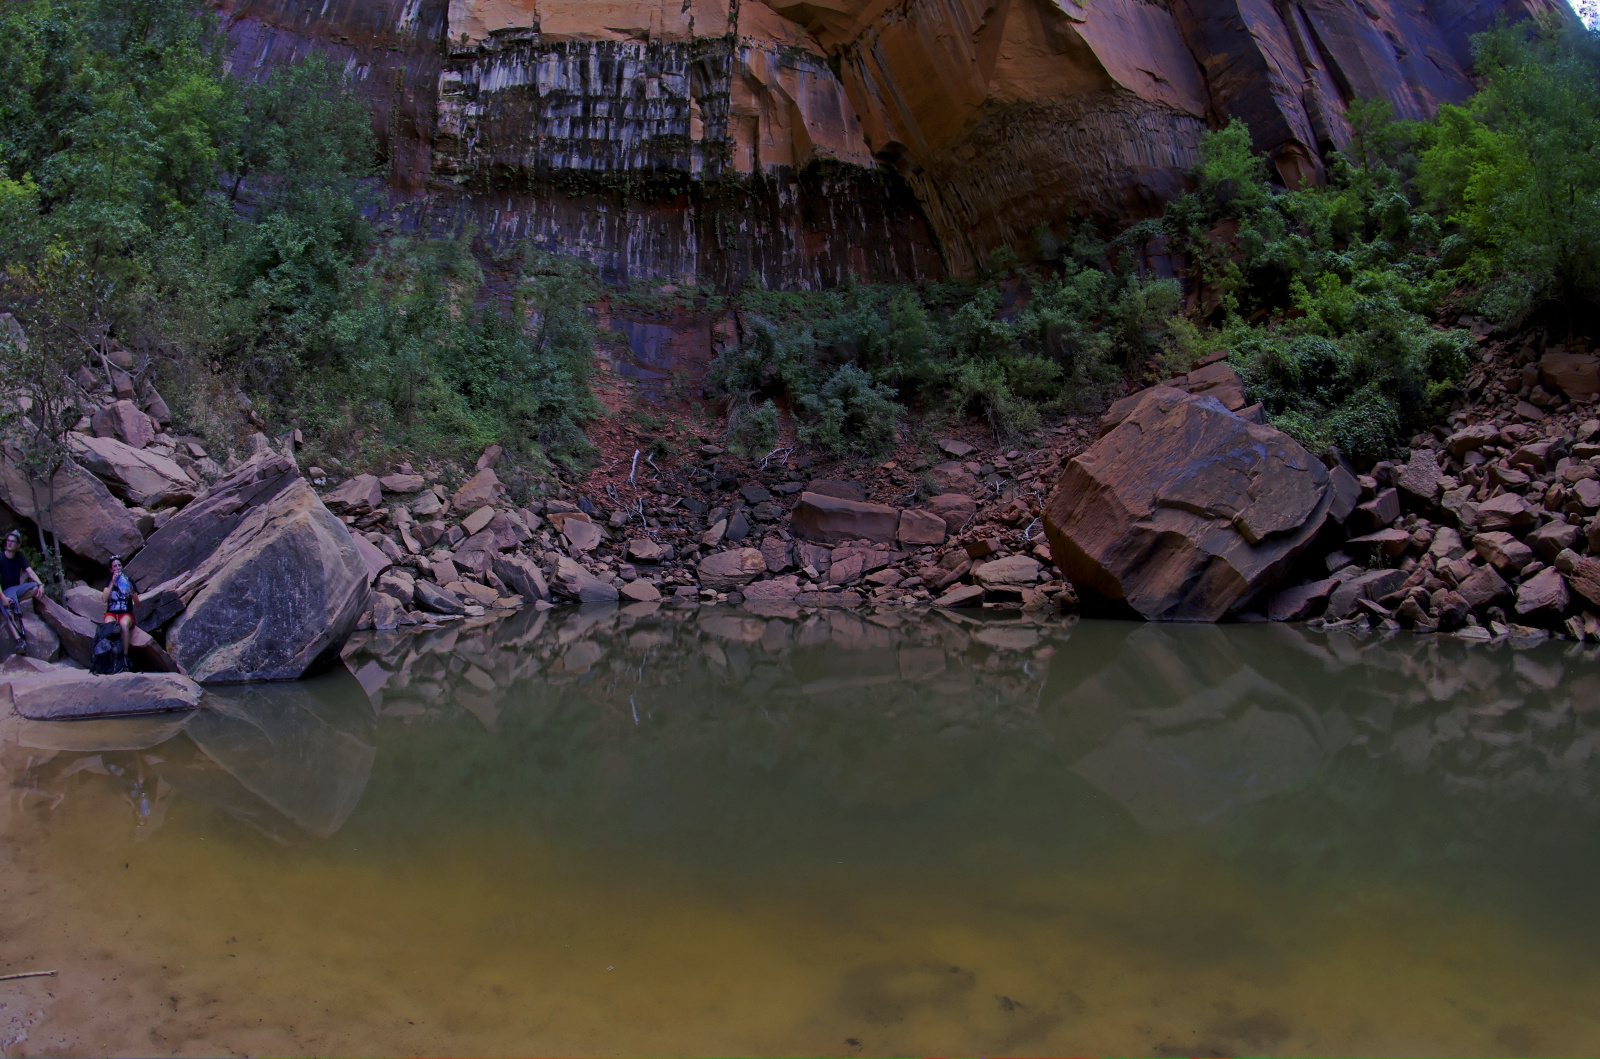 The Higher Emerald Pool - Zion National Park, Utah